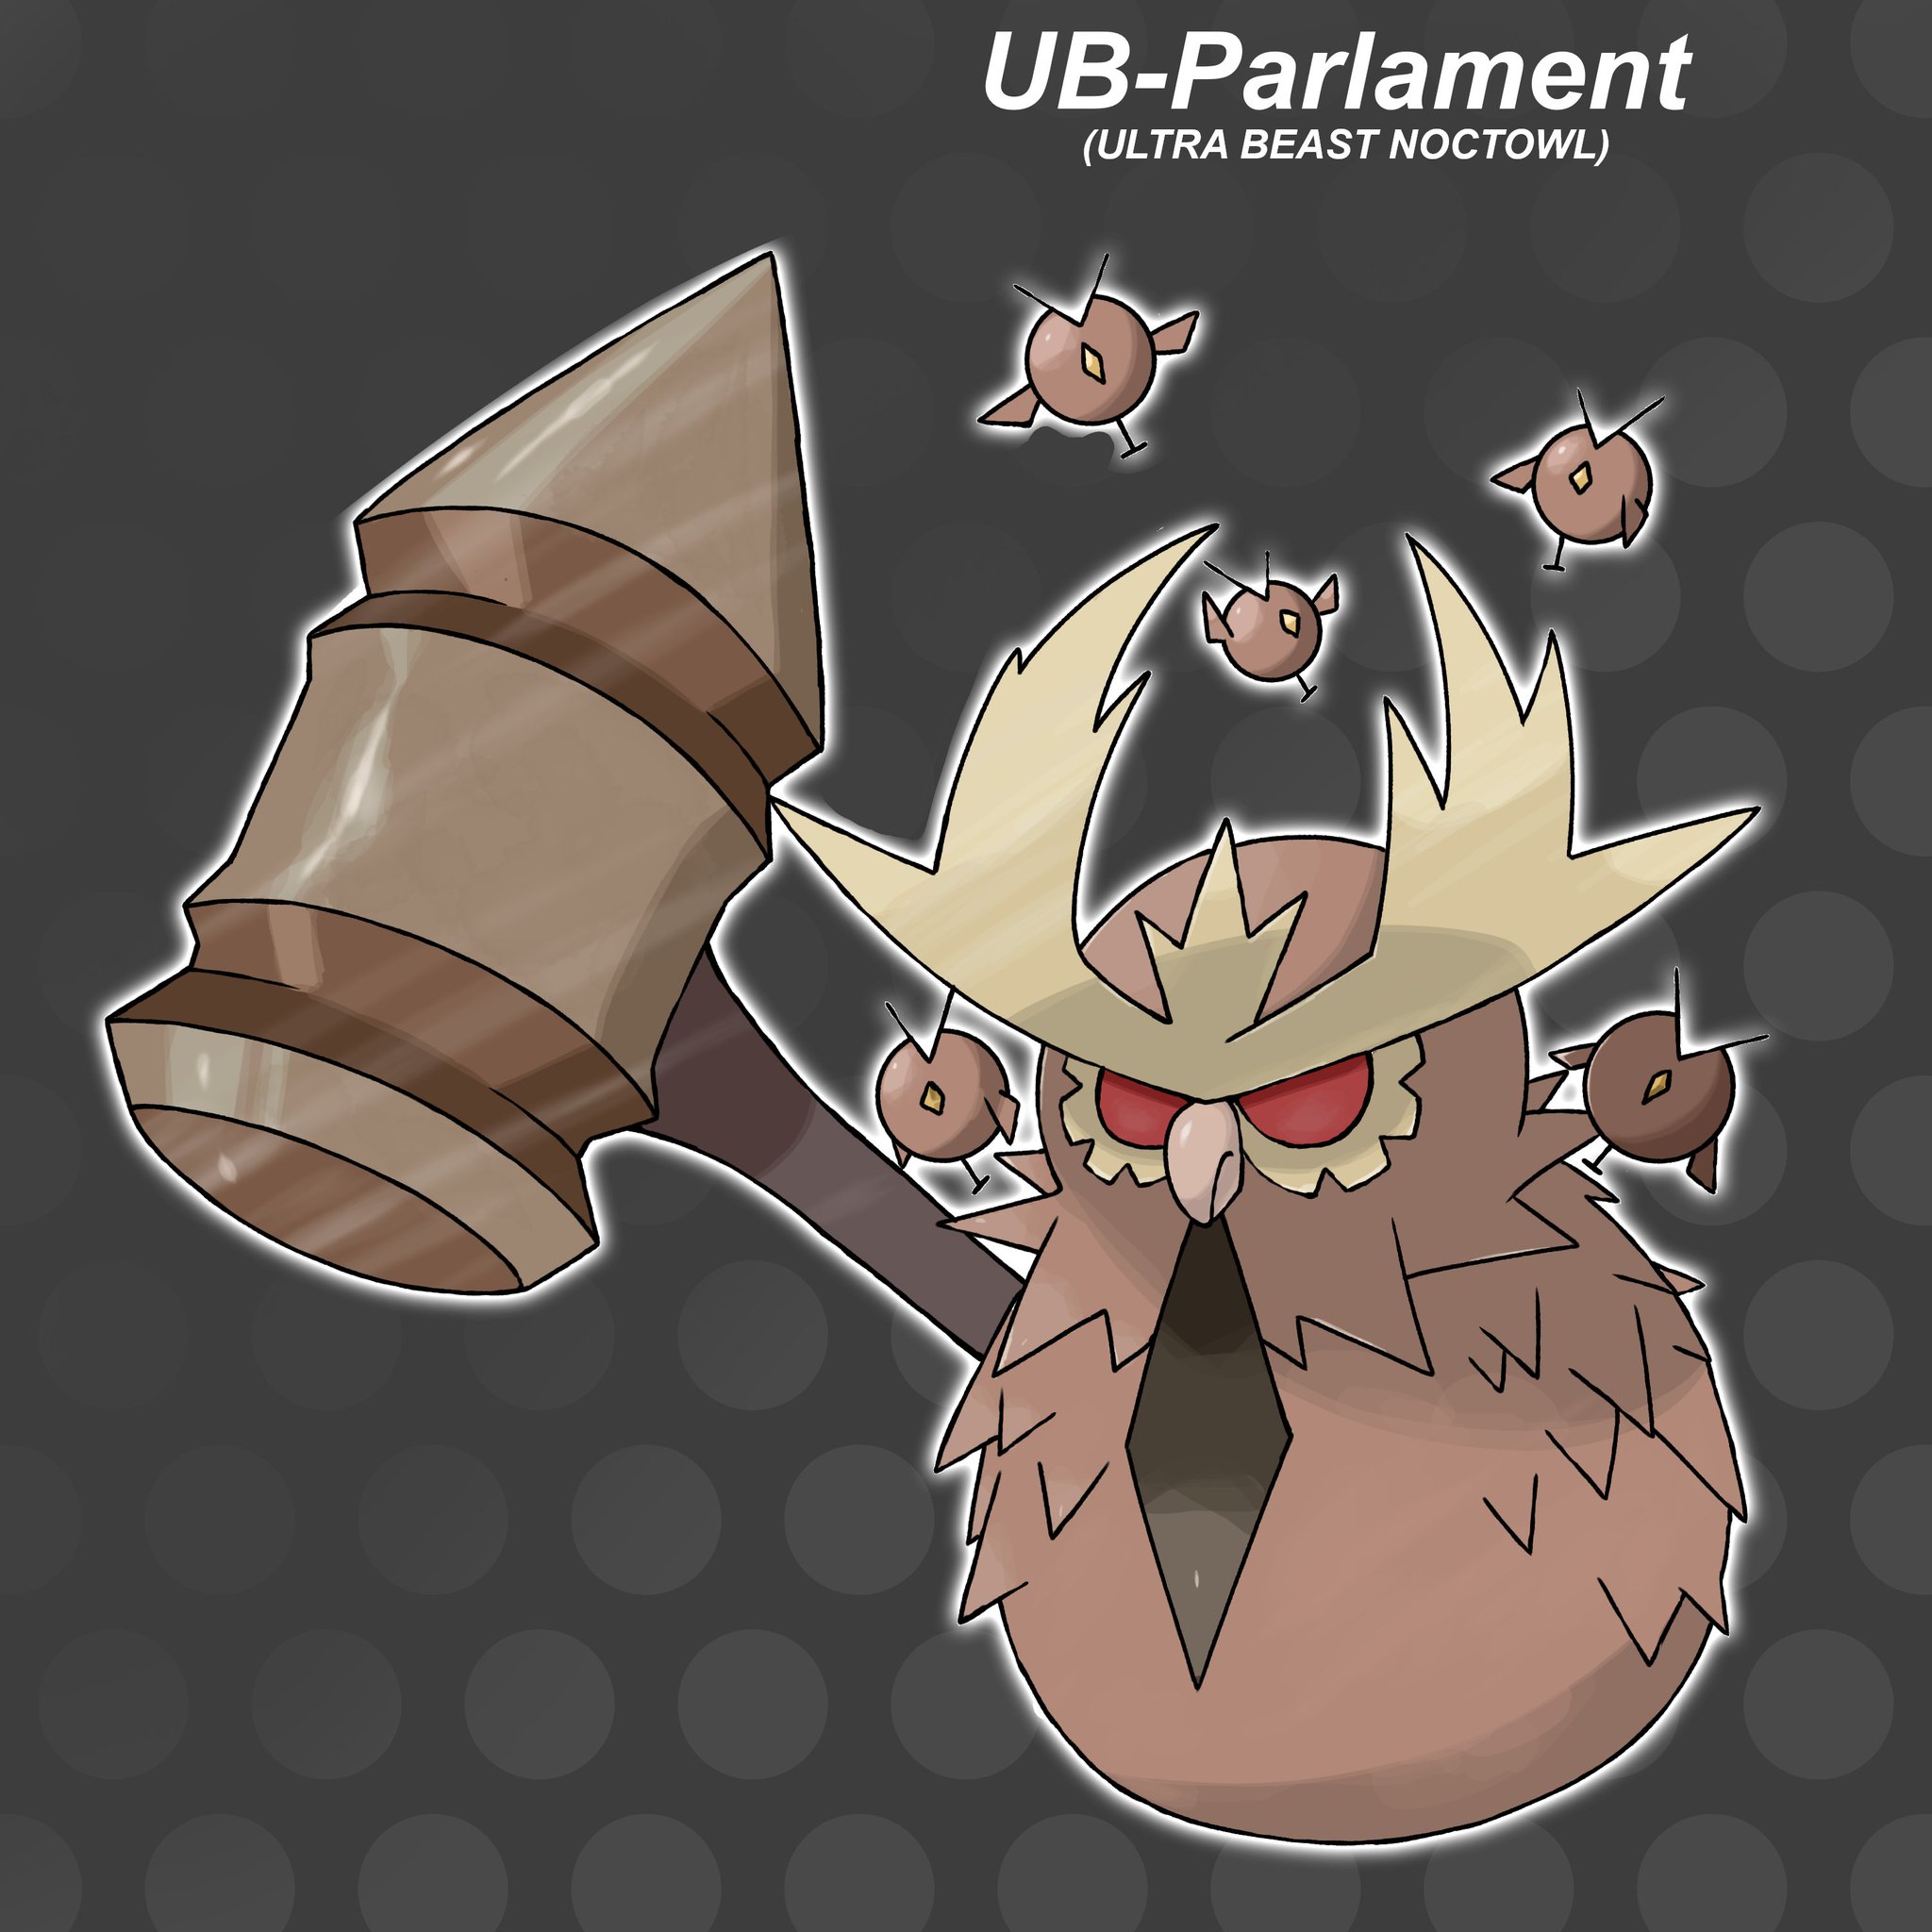 Subarashii on X: UB-Parlament Flying/Normal Encountering this Ultra Beast  will be a tough challenge to battle! It has as similar ability to Wonder  Guard (Break the Law) which super effective moves have